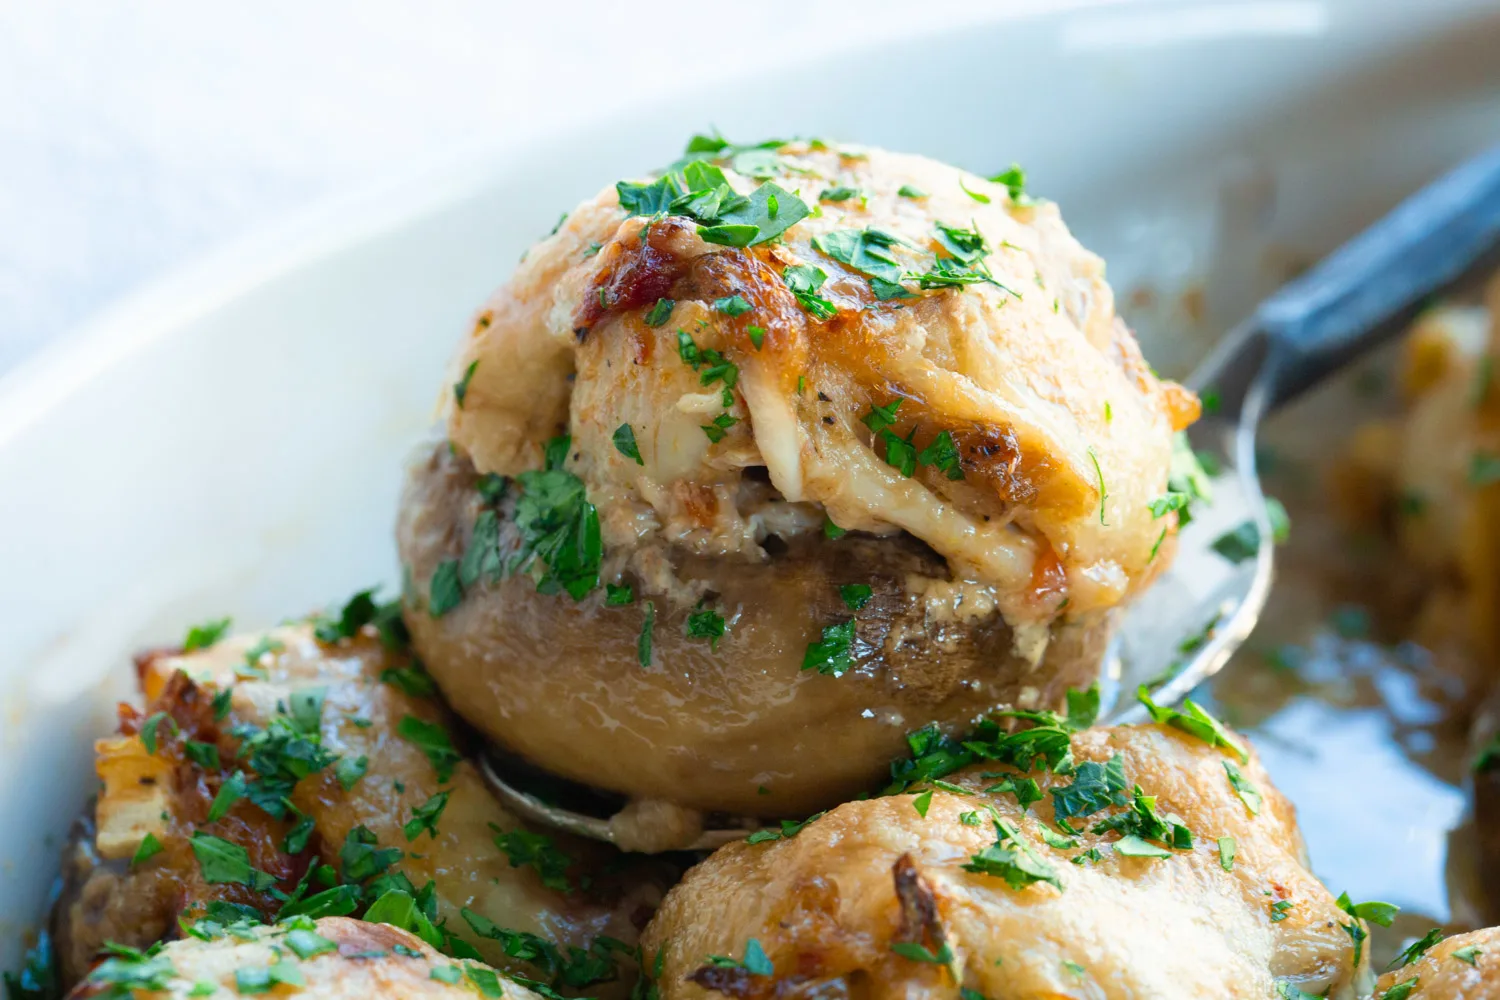 Smaller mushrooms can make a great first course, shown in an olive oil baked crock with parsley, served with a spoon. 